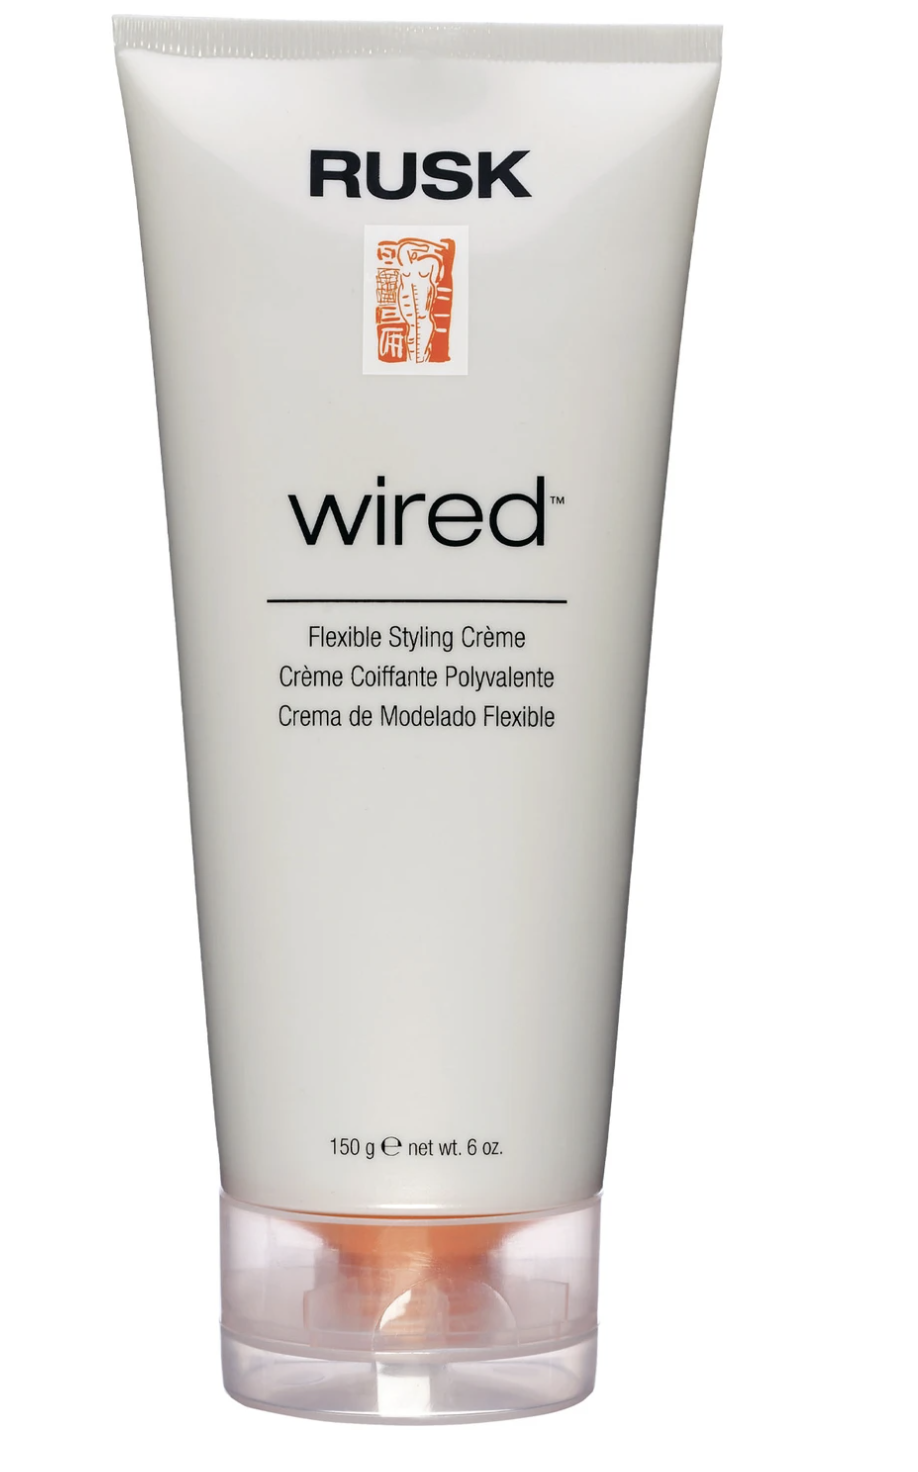 Rusk Wired Flex Styling Creme